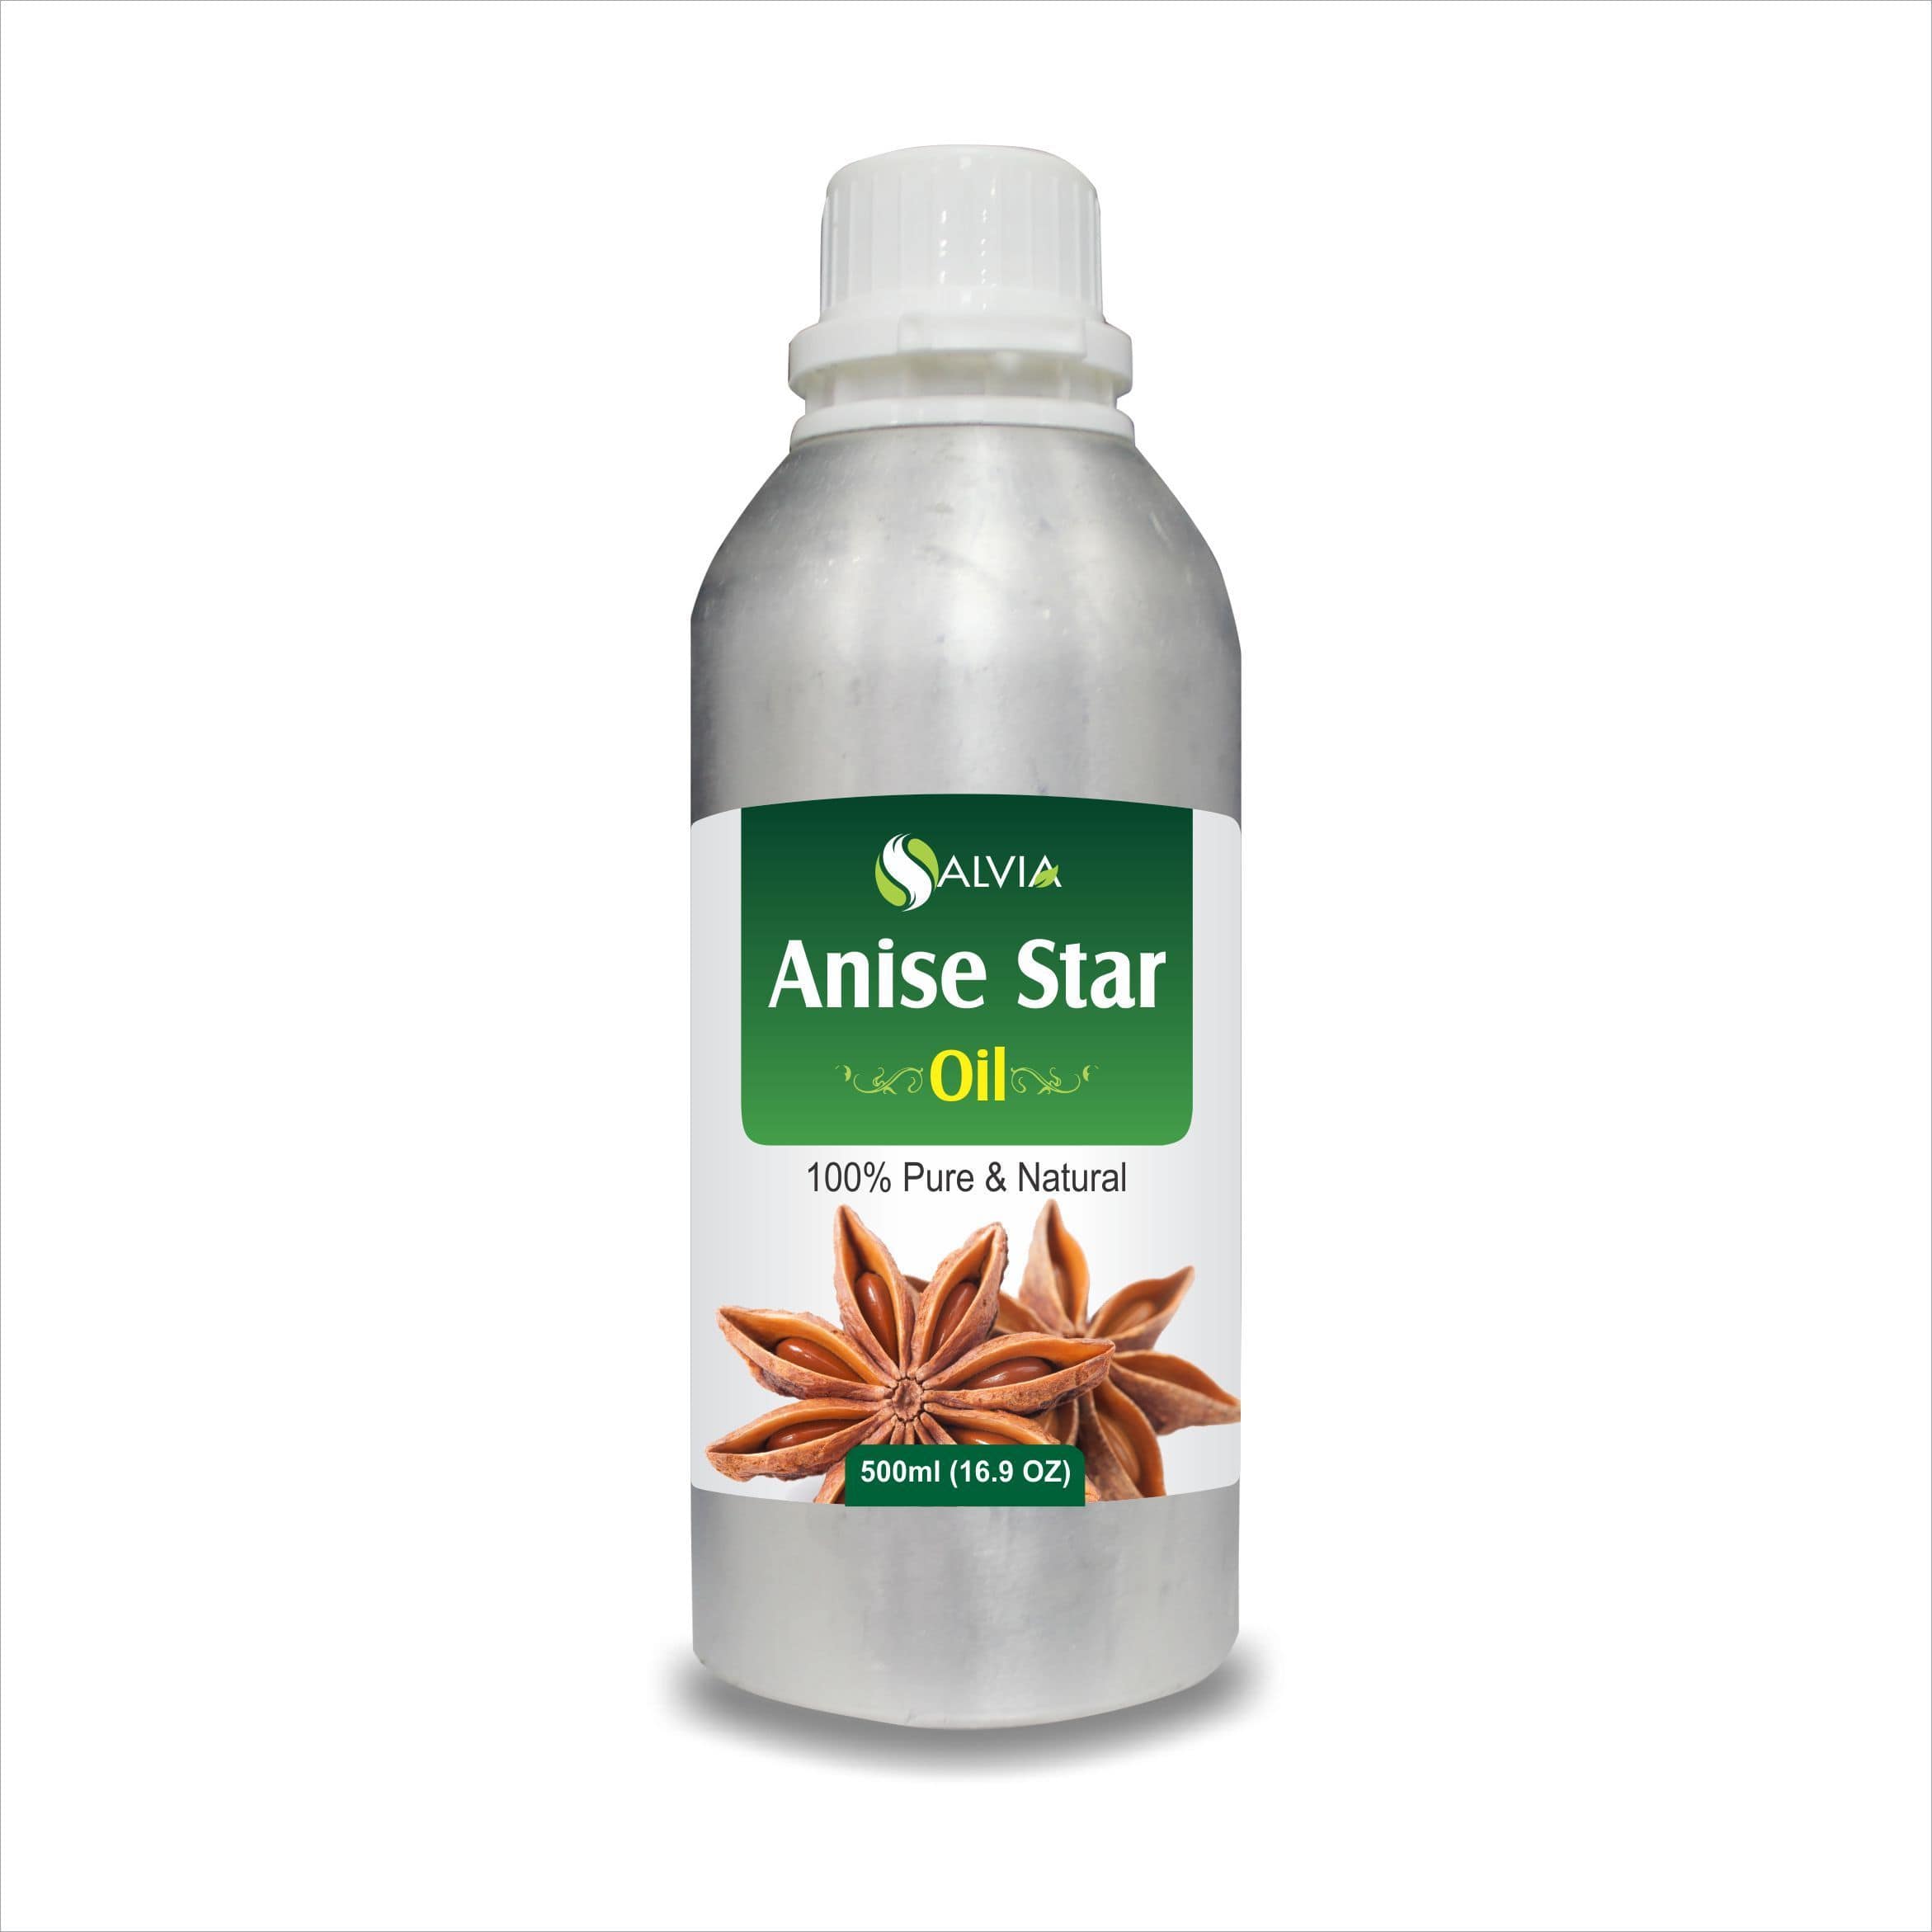 anise star essential oil benefits